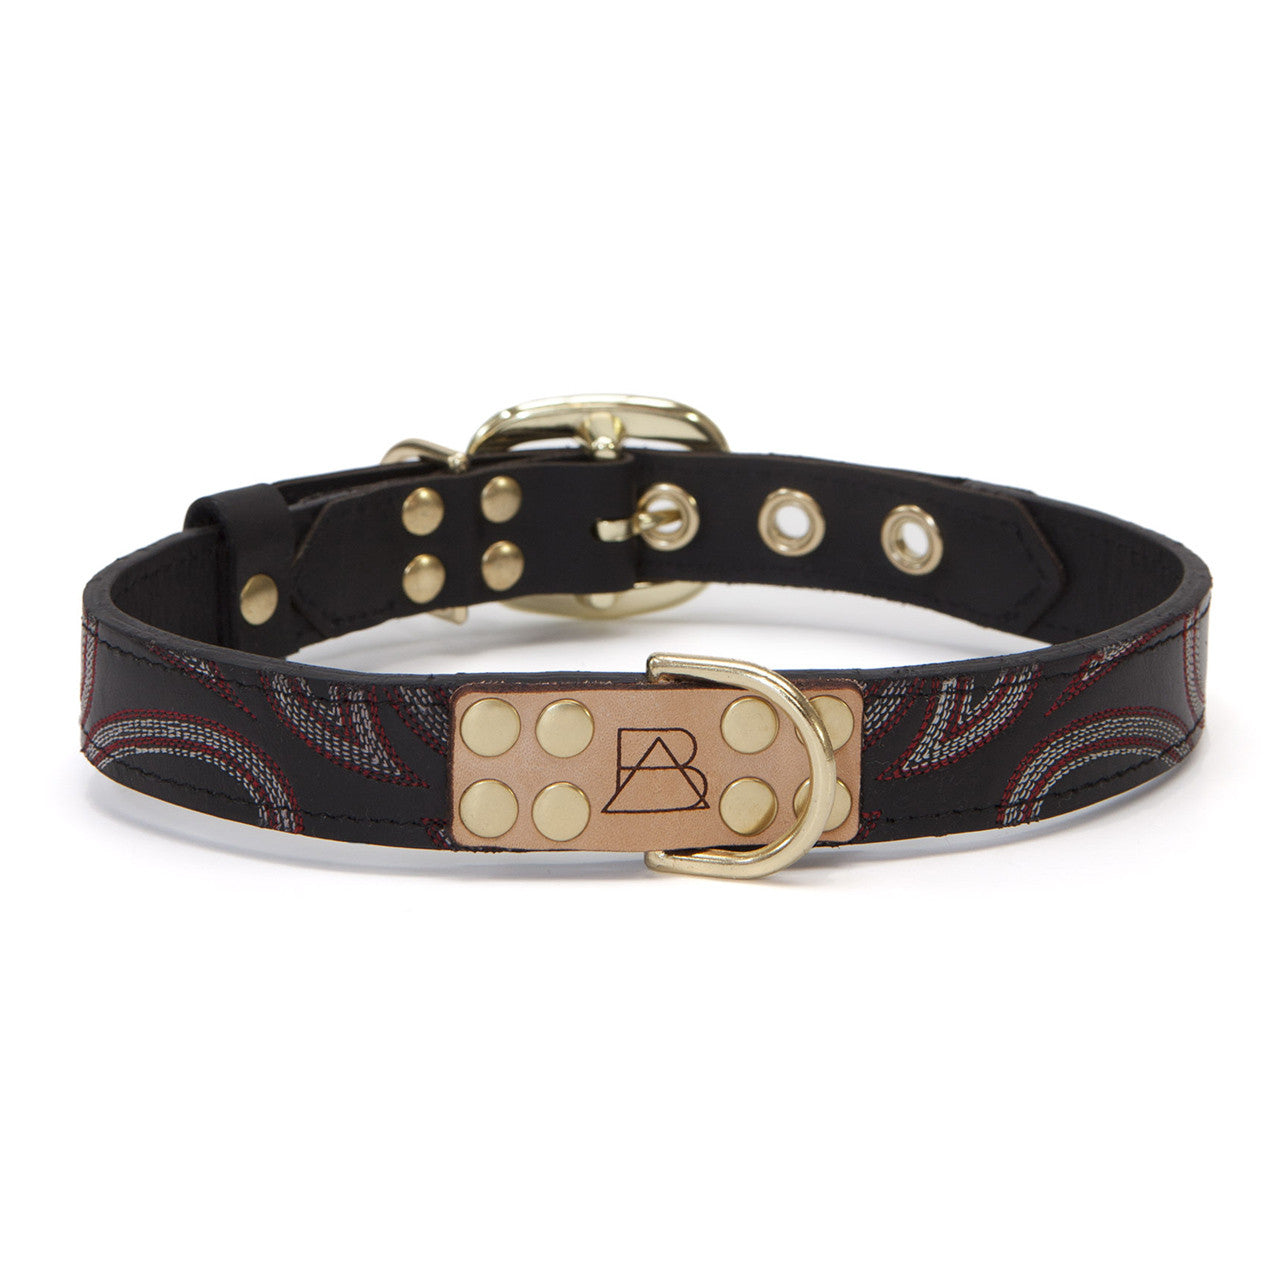 Black Dog Collar with Brown Leather + Black and Ivory Stitching